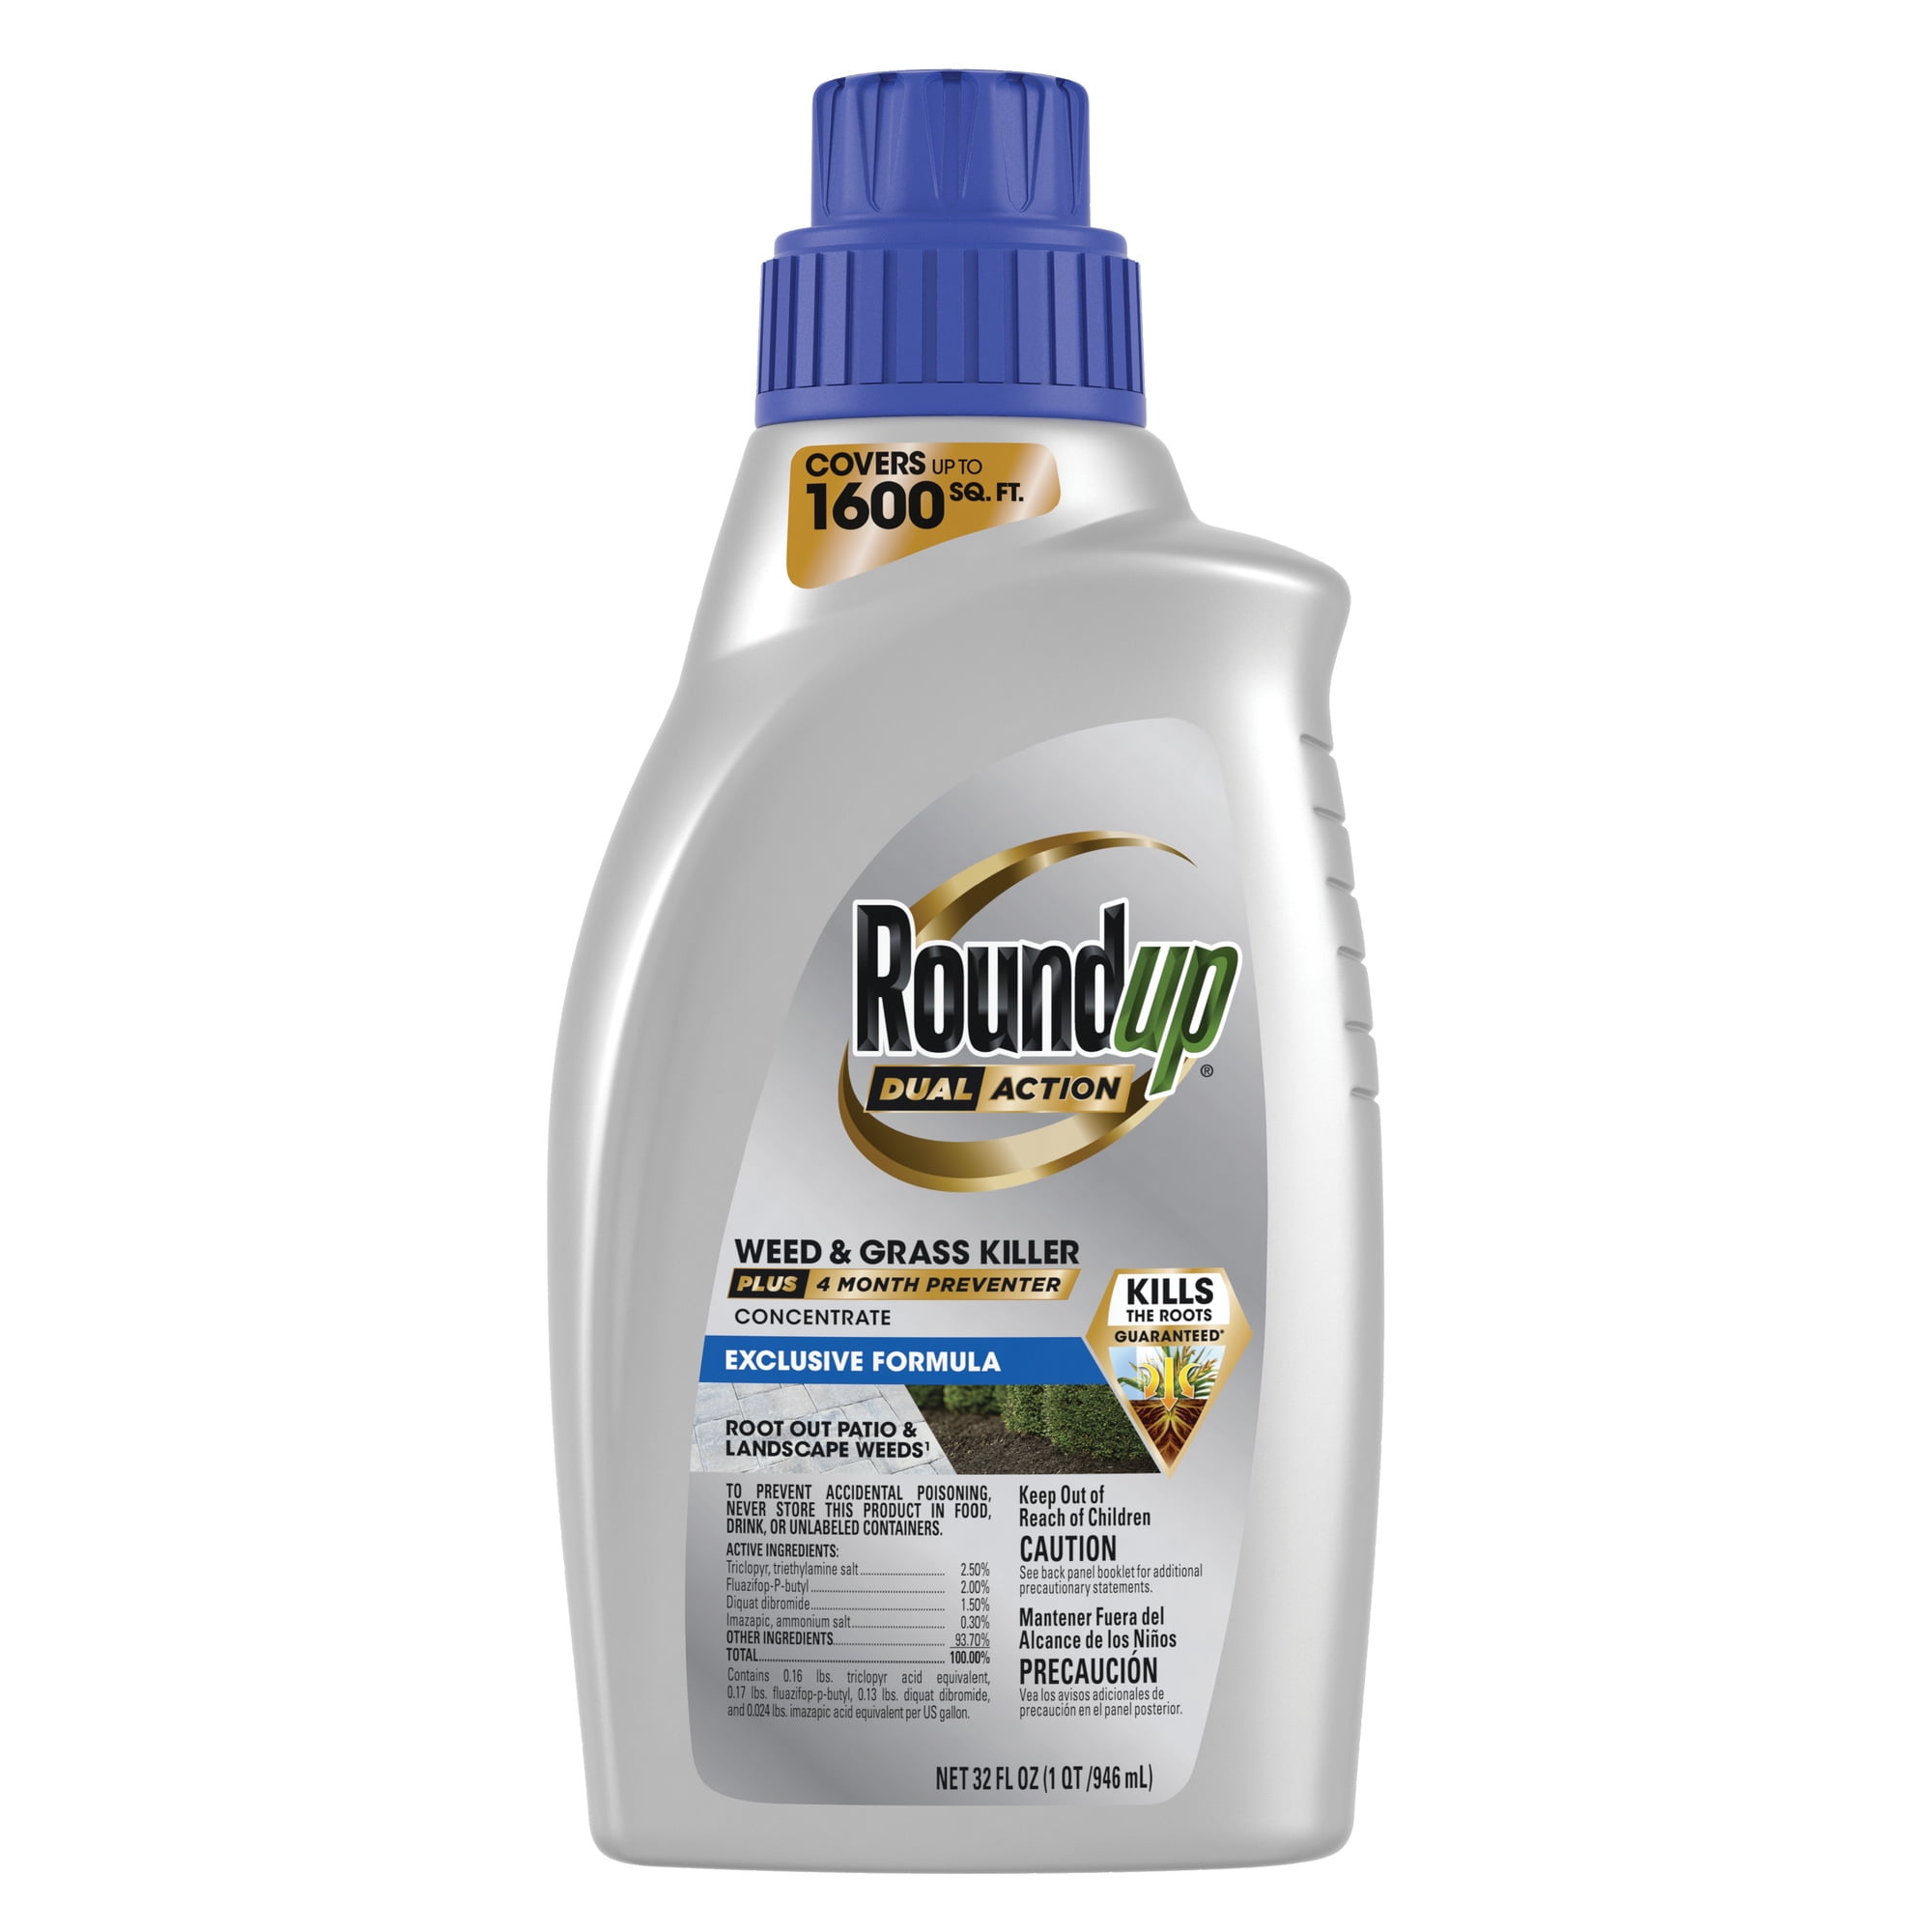 Image of Roundup Dual Action Weed & Grass Killer Plus 4 Month Preventer Concentrate